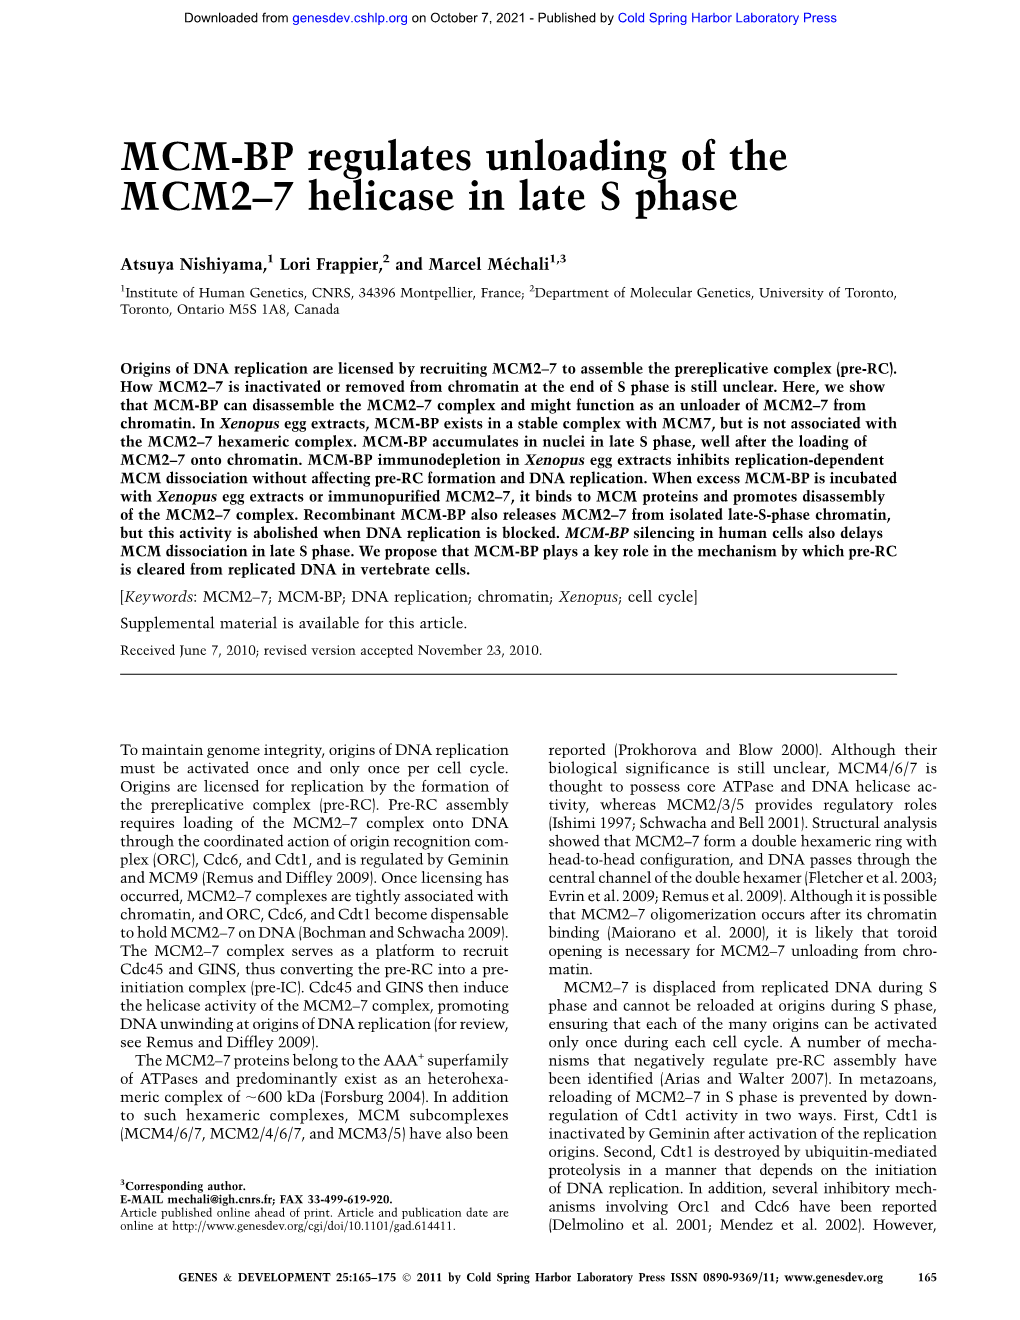 MCM-BP Regulates Unloading of the MCM2–7 Helicase in Late S Phase